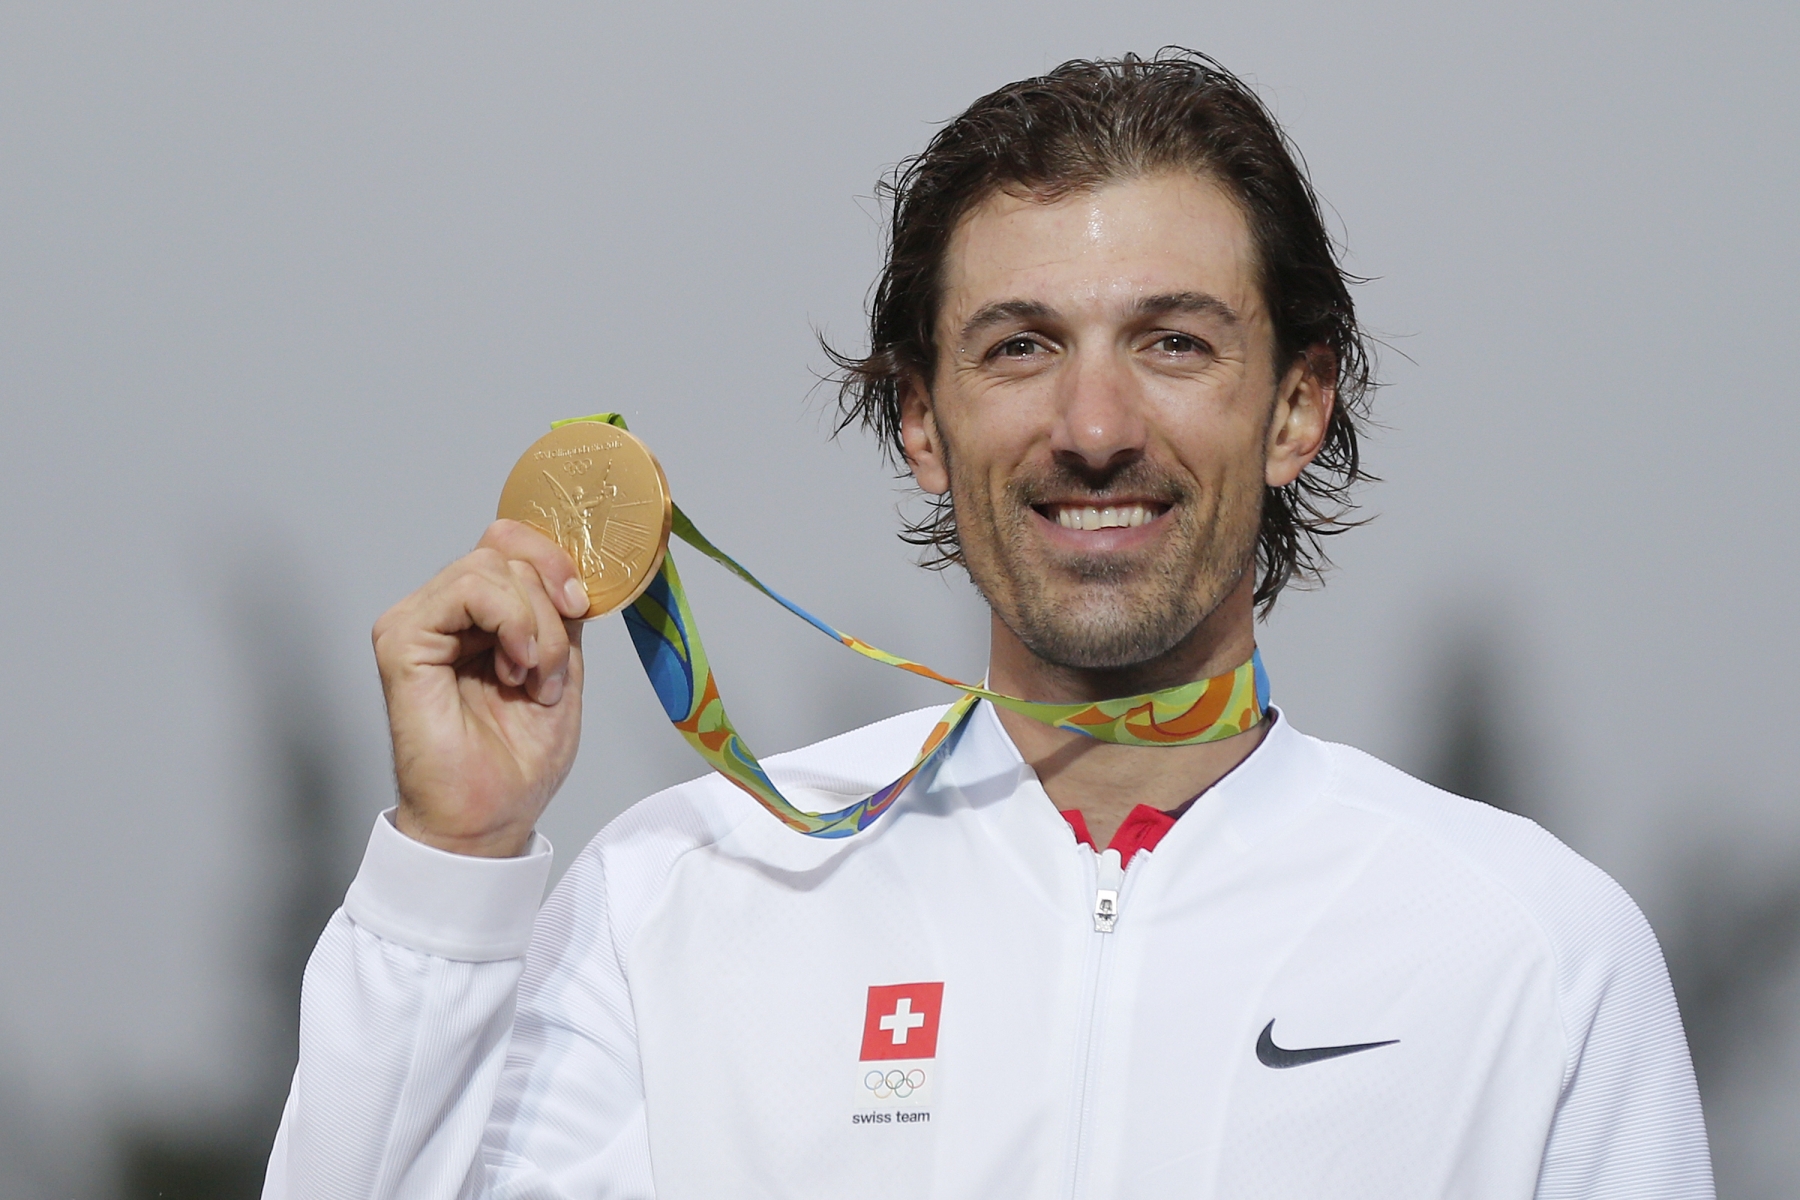 Switzerland's Fabian Cancellara poses with the gold medal after winning the men's time trial road race in Rio de Janeiro, Brazil, at the Rio 2016 Olympic Summer Games, pictured on Wednesday, August 10, 2016. (KEYSTONE/Peter Klaunzer)